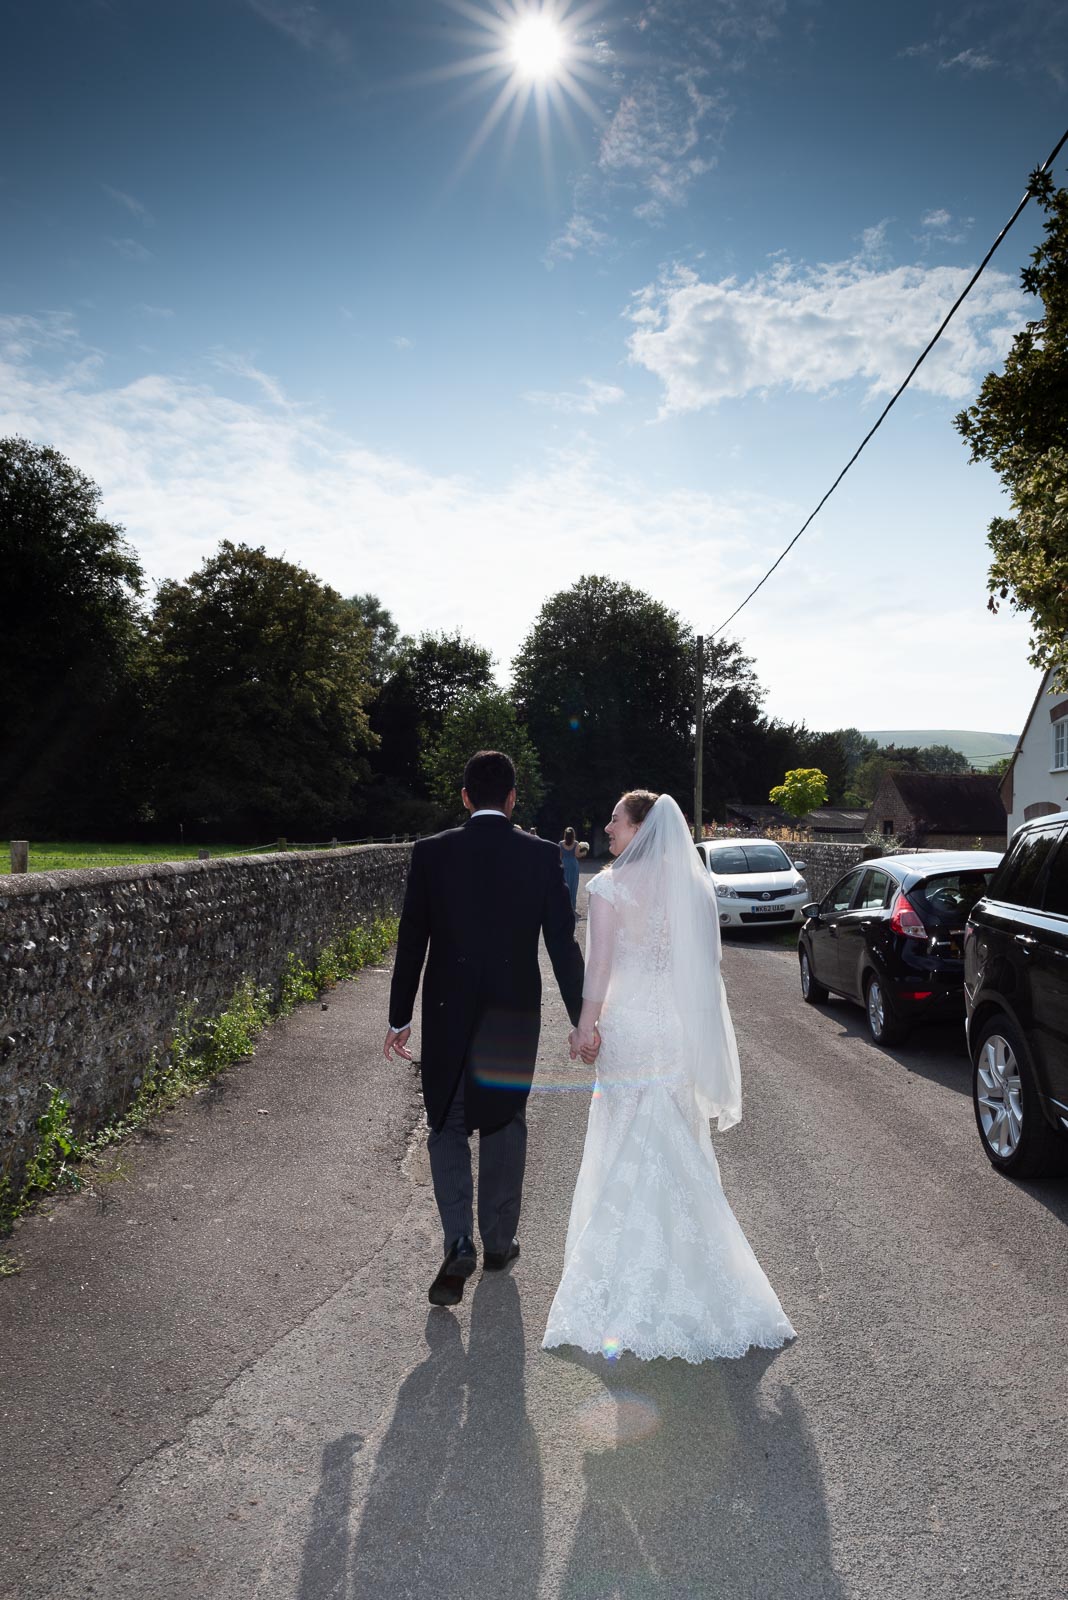 Lily and Callum walk back to the family home after getting married at St Nicholas Church in Iford.